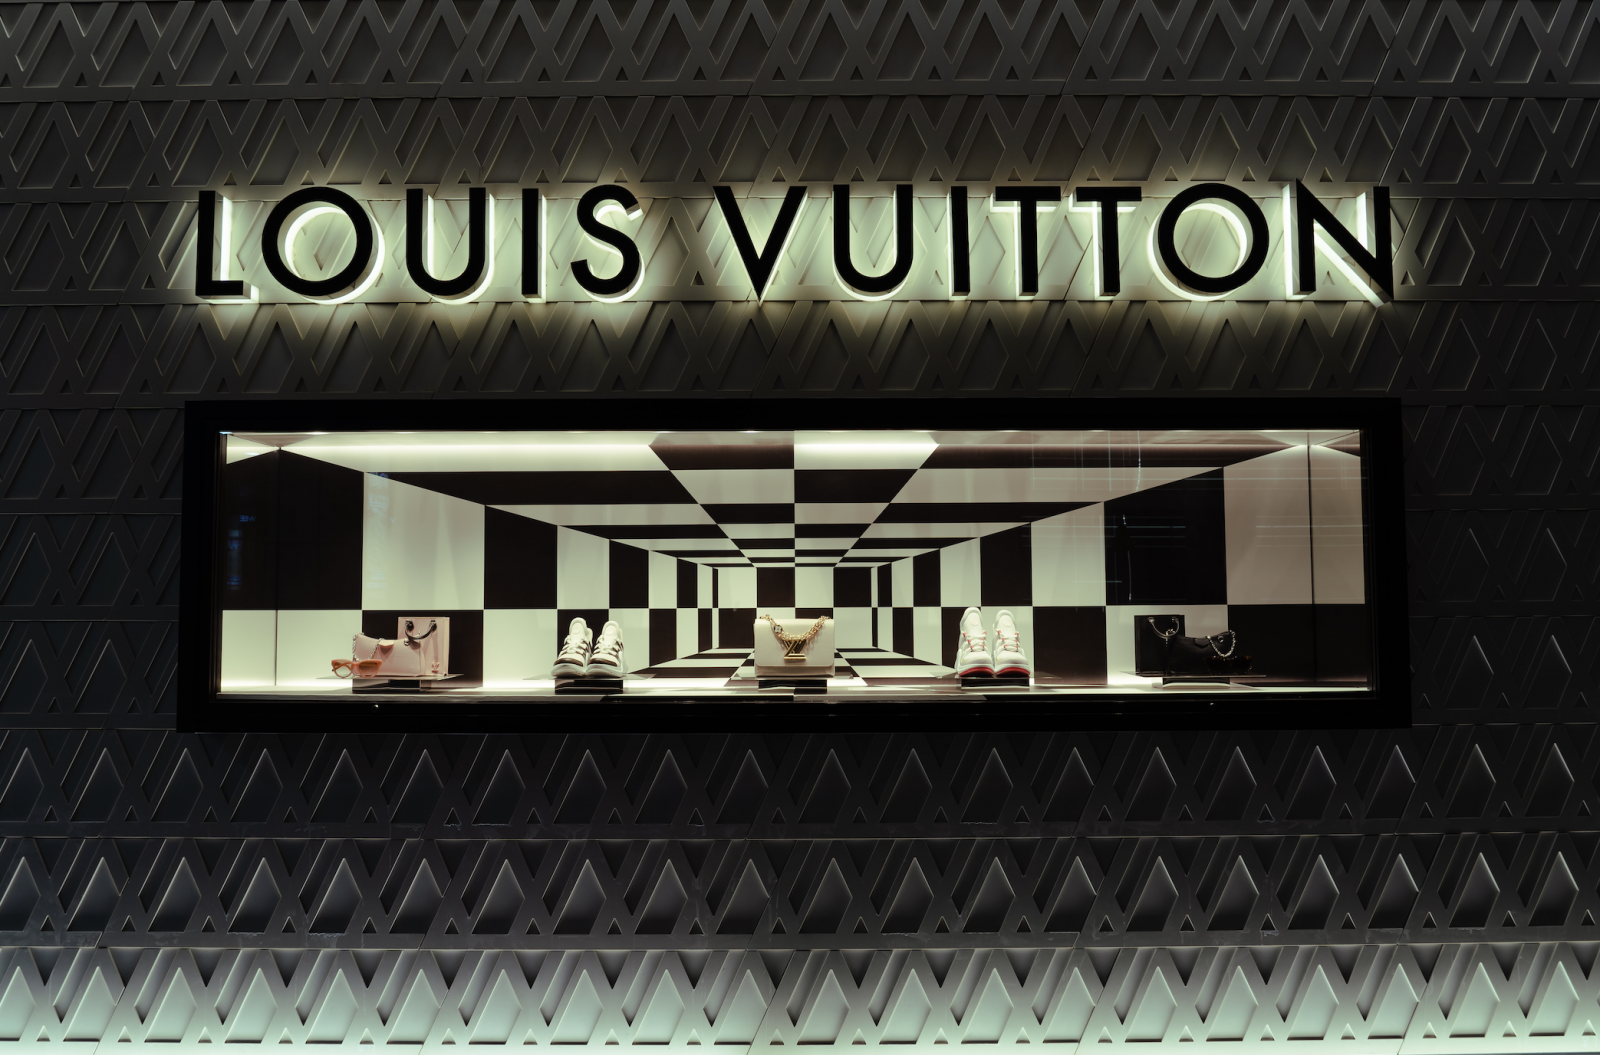 Behind the Brand: The Making of the Louis Vuitton Malletier